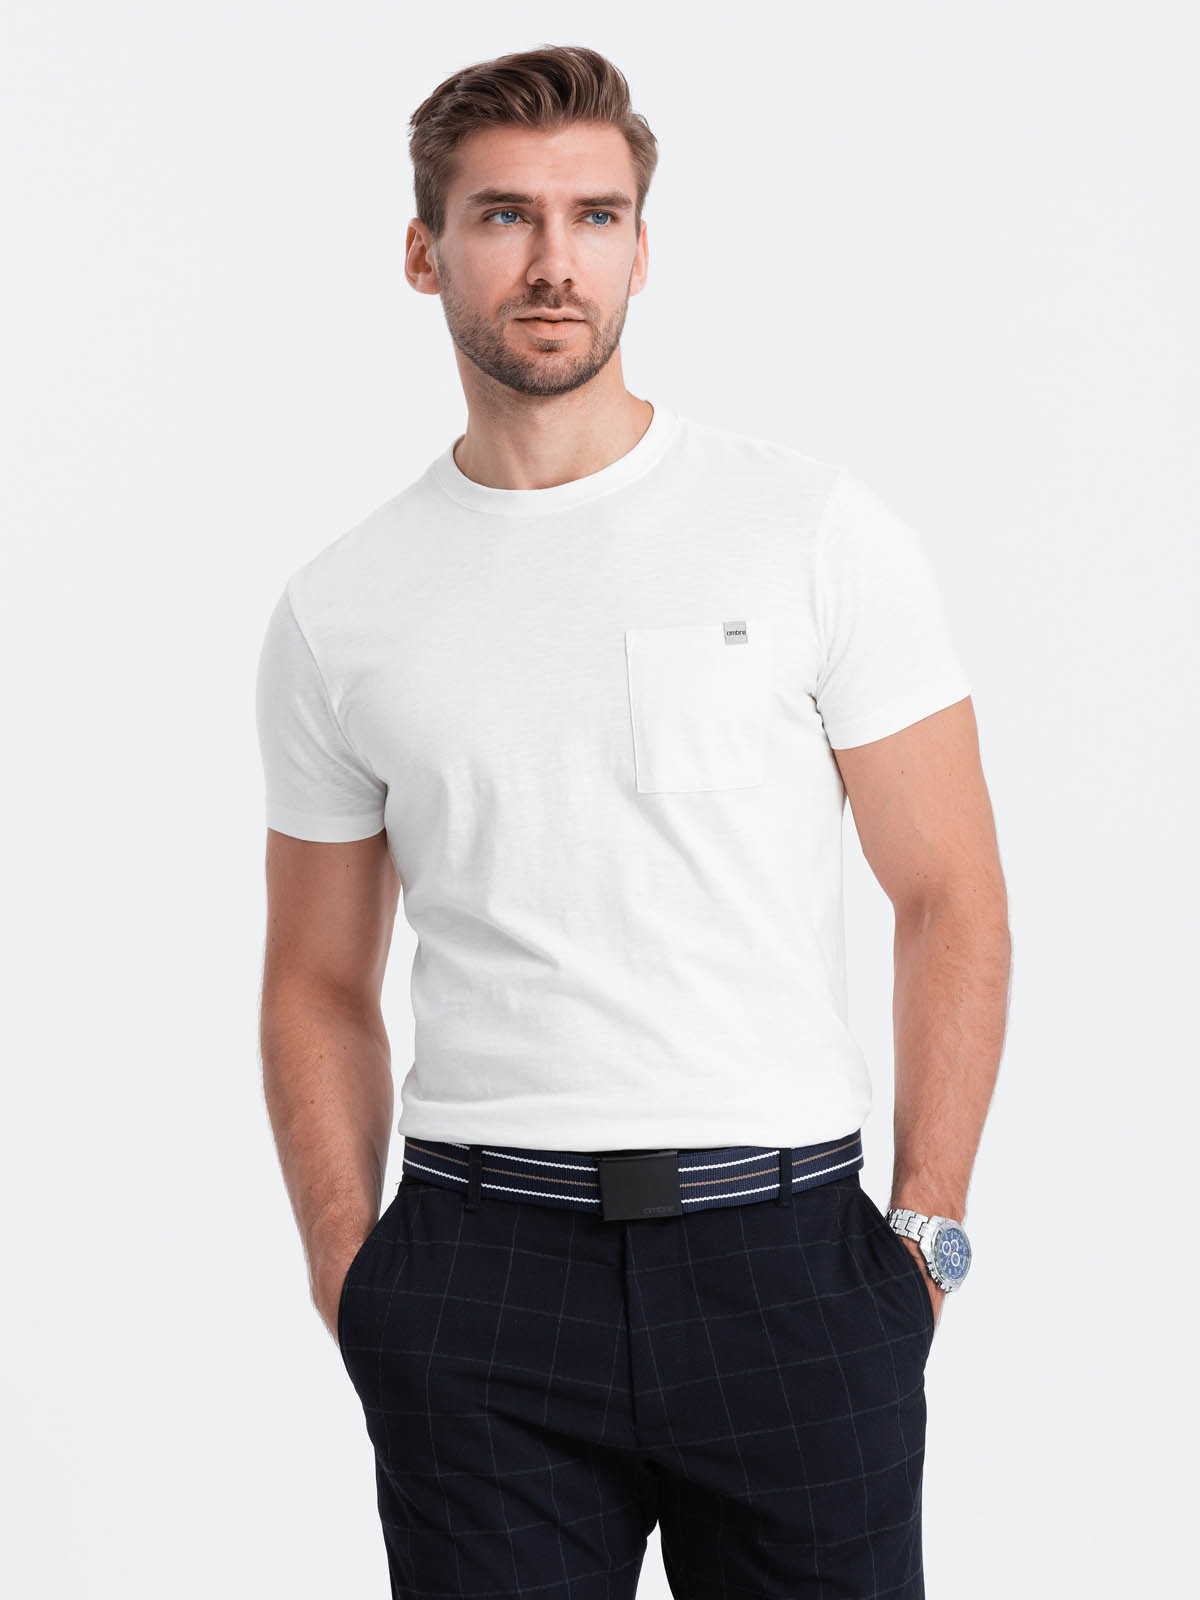 Men's knitted T-shirt with patch pocket V7 S1621